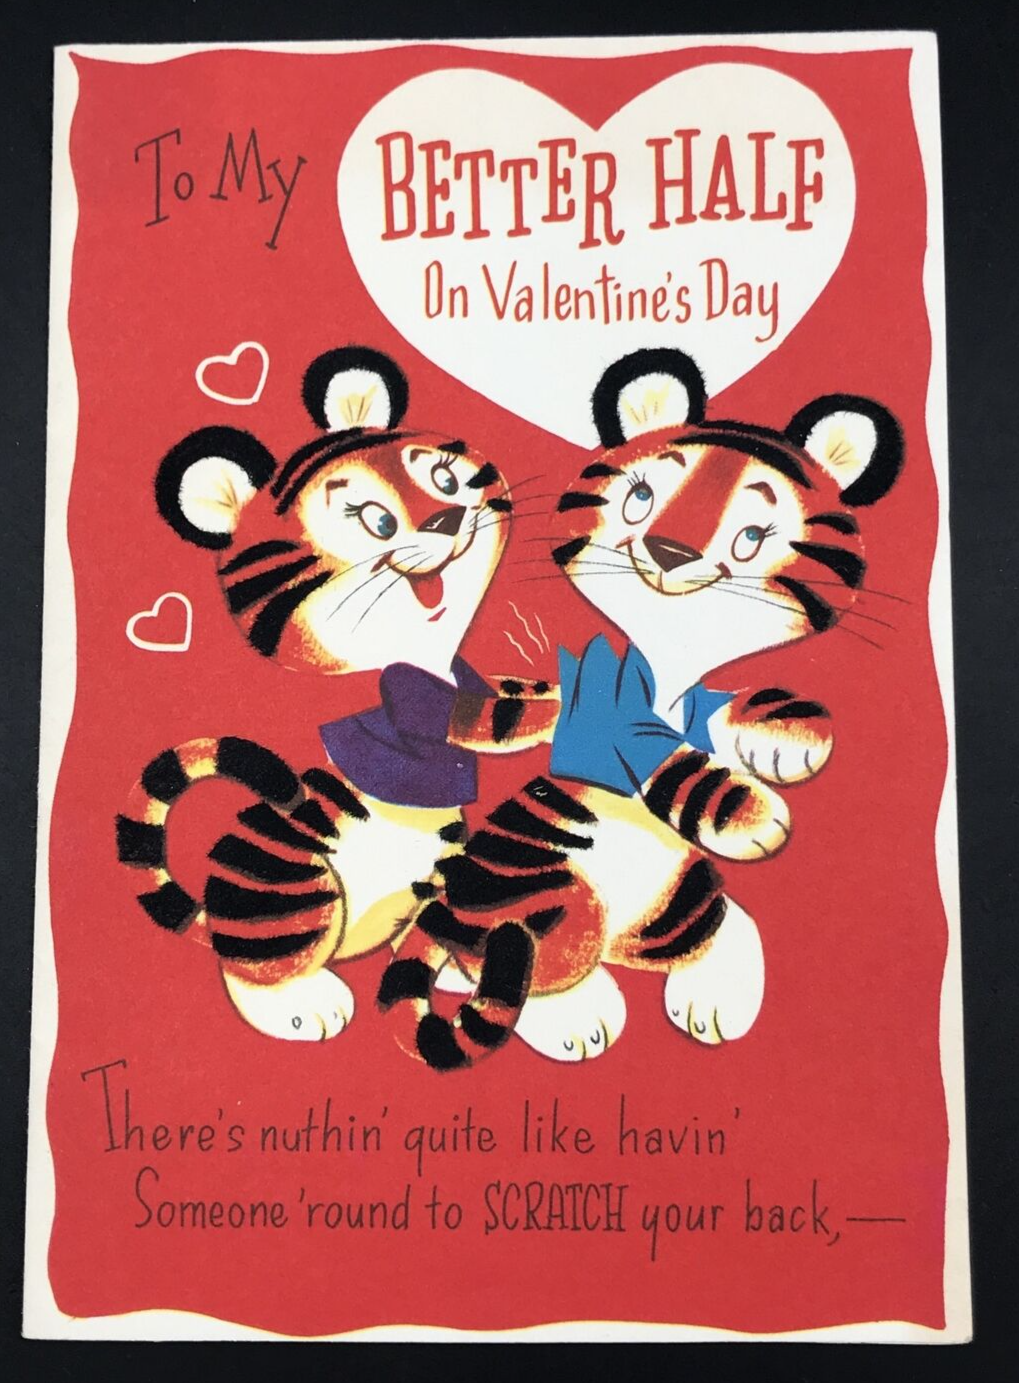 Primary image for VTG Rust Craft Playful Tigers Anthropomorphic Valentine Greeting Card w/ Fuzzy